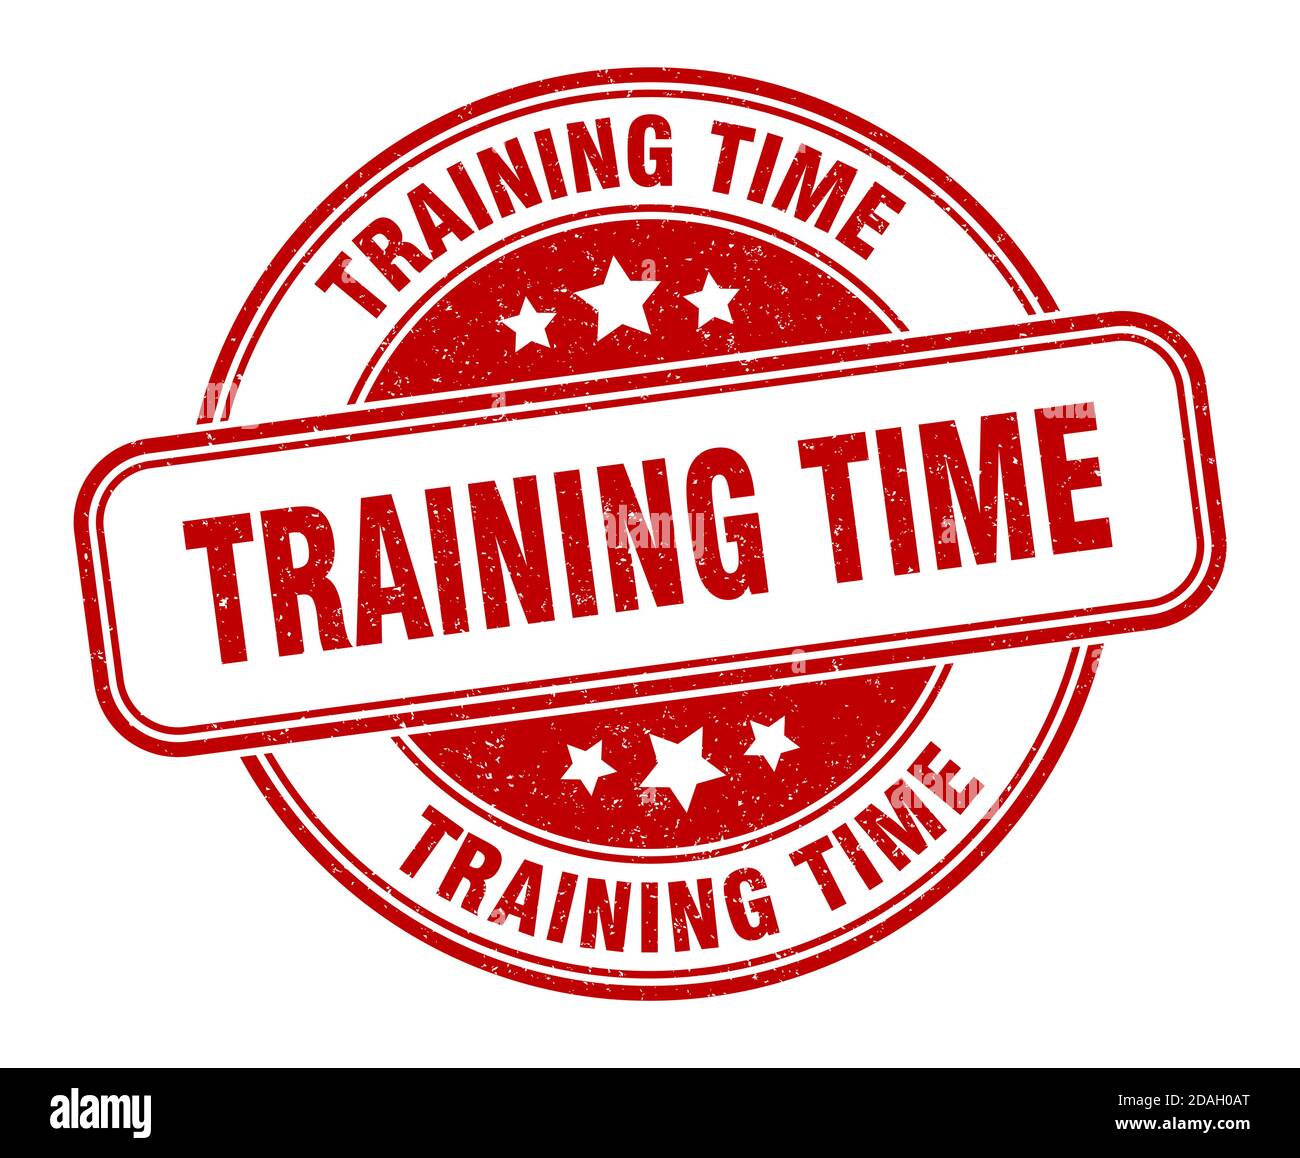 Training time details